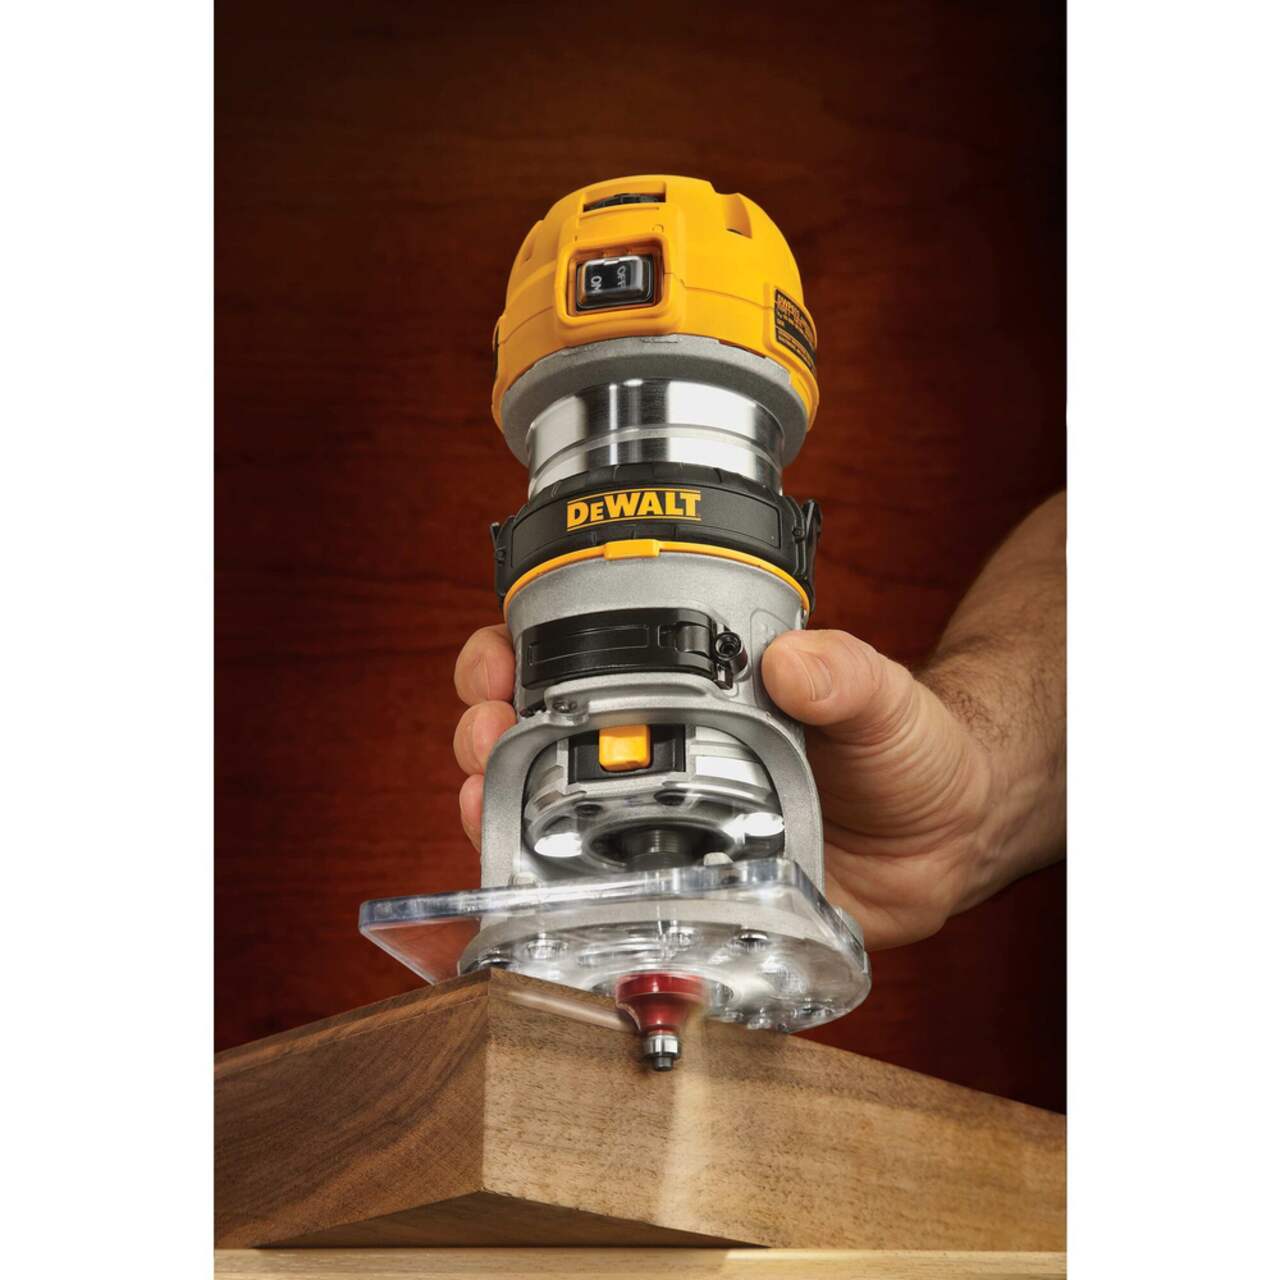 DEWALT DWP611PK 1-1/4 HP (Max Motor HP) Fixed Base and Plunge Compact  Router Kit